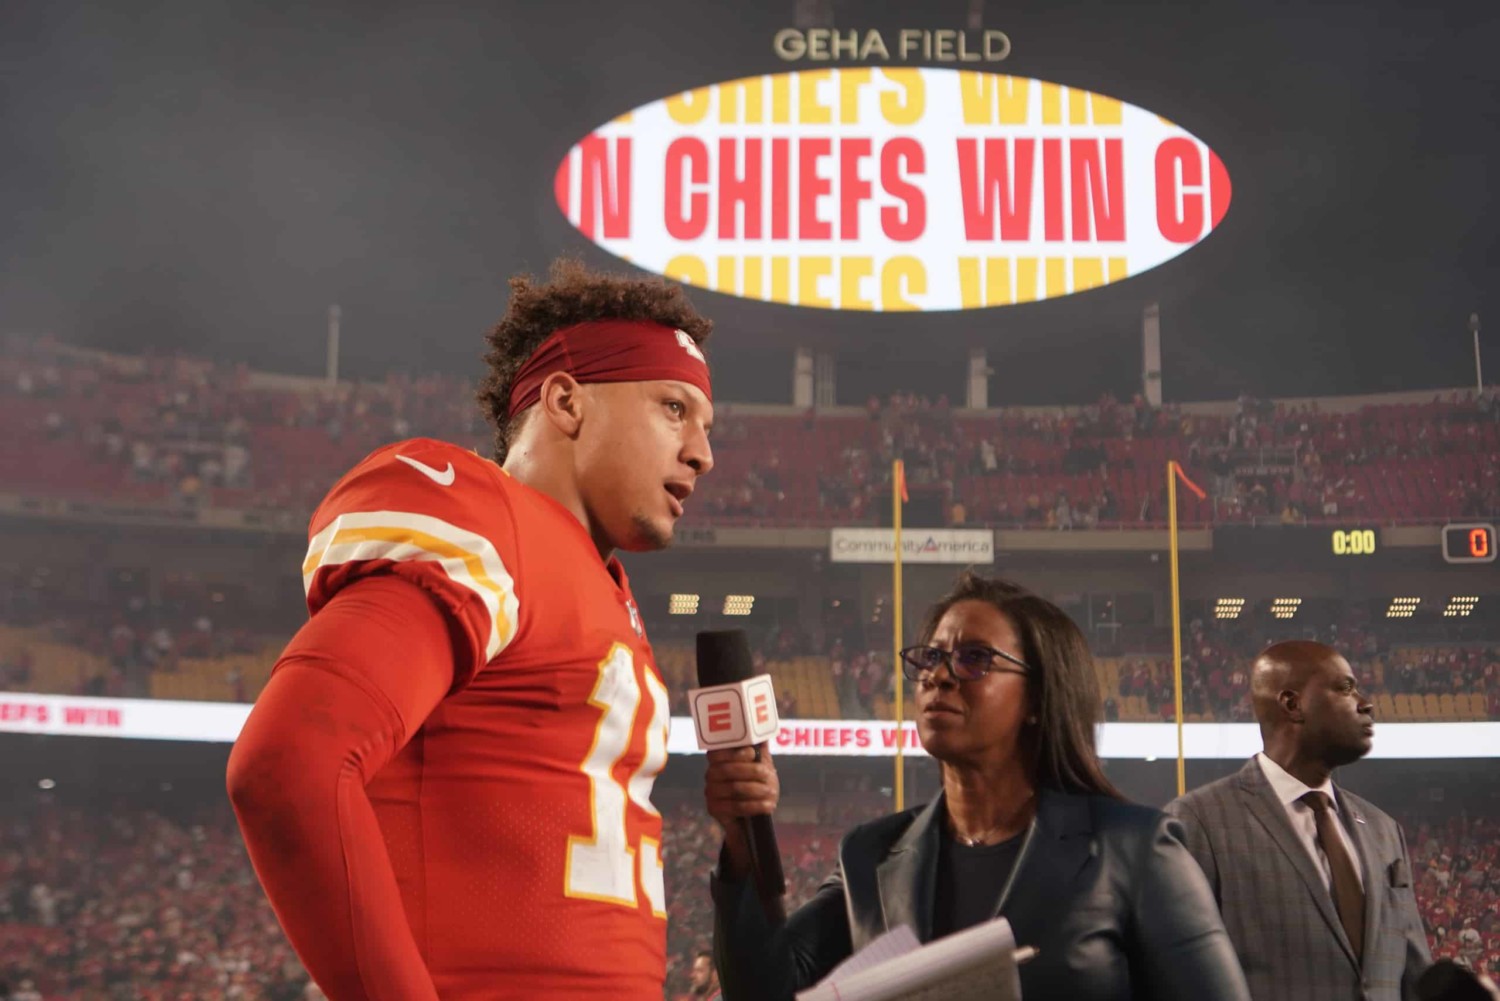 ESPN's Monday Night Football: Doubleheader Saturday Debut Registers  Viewership of 20.3 Million for Cowboys-Eagles and 19.1 Million for  Chiefs-Broncos, ESPN's Most-Watched NFL Regular Season Games in More than a  Decade - ESPN